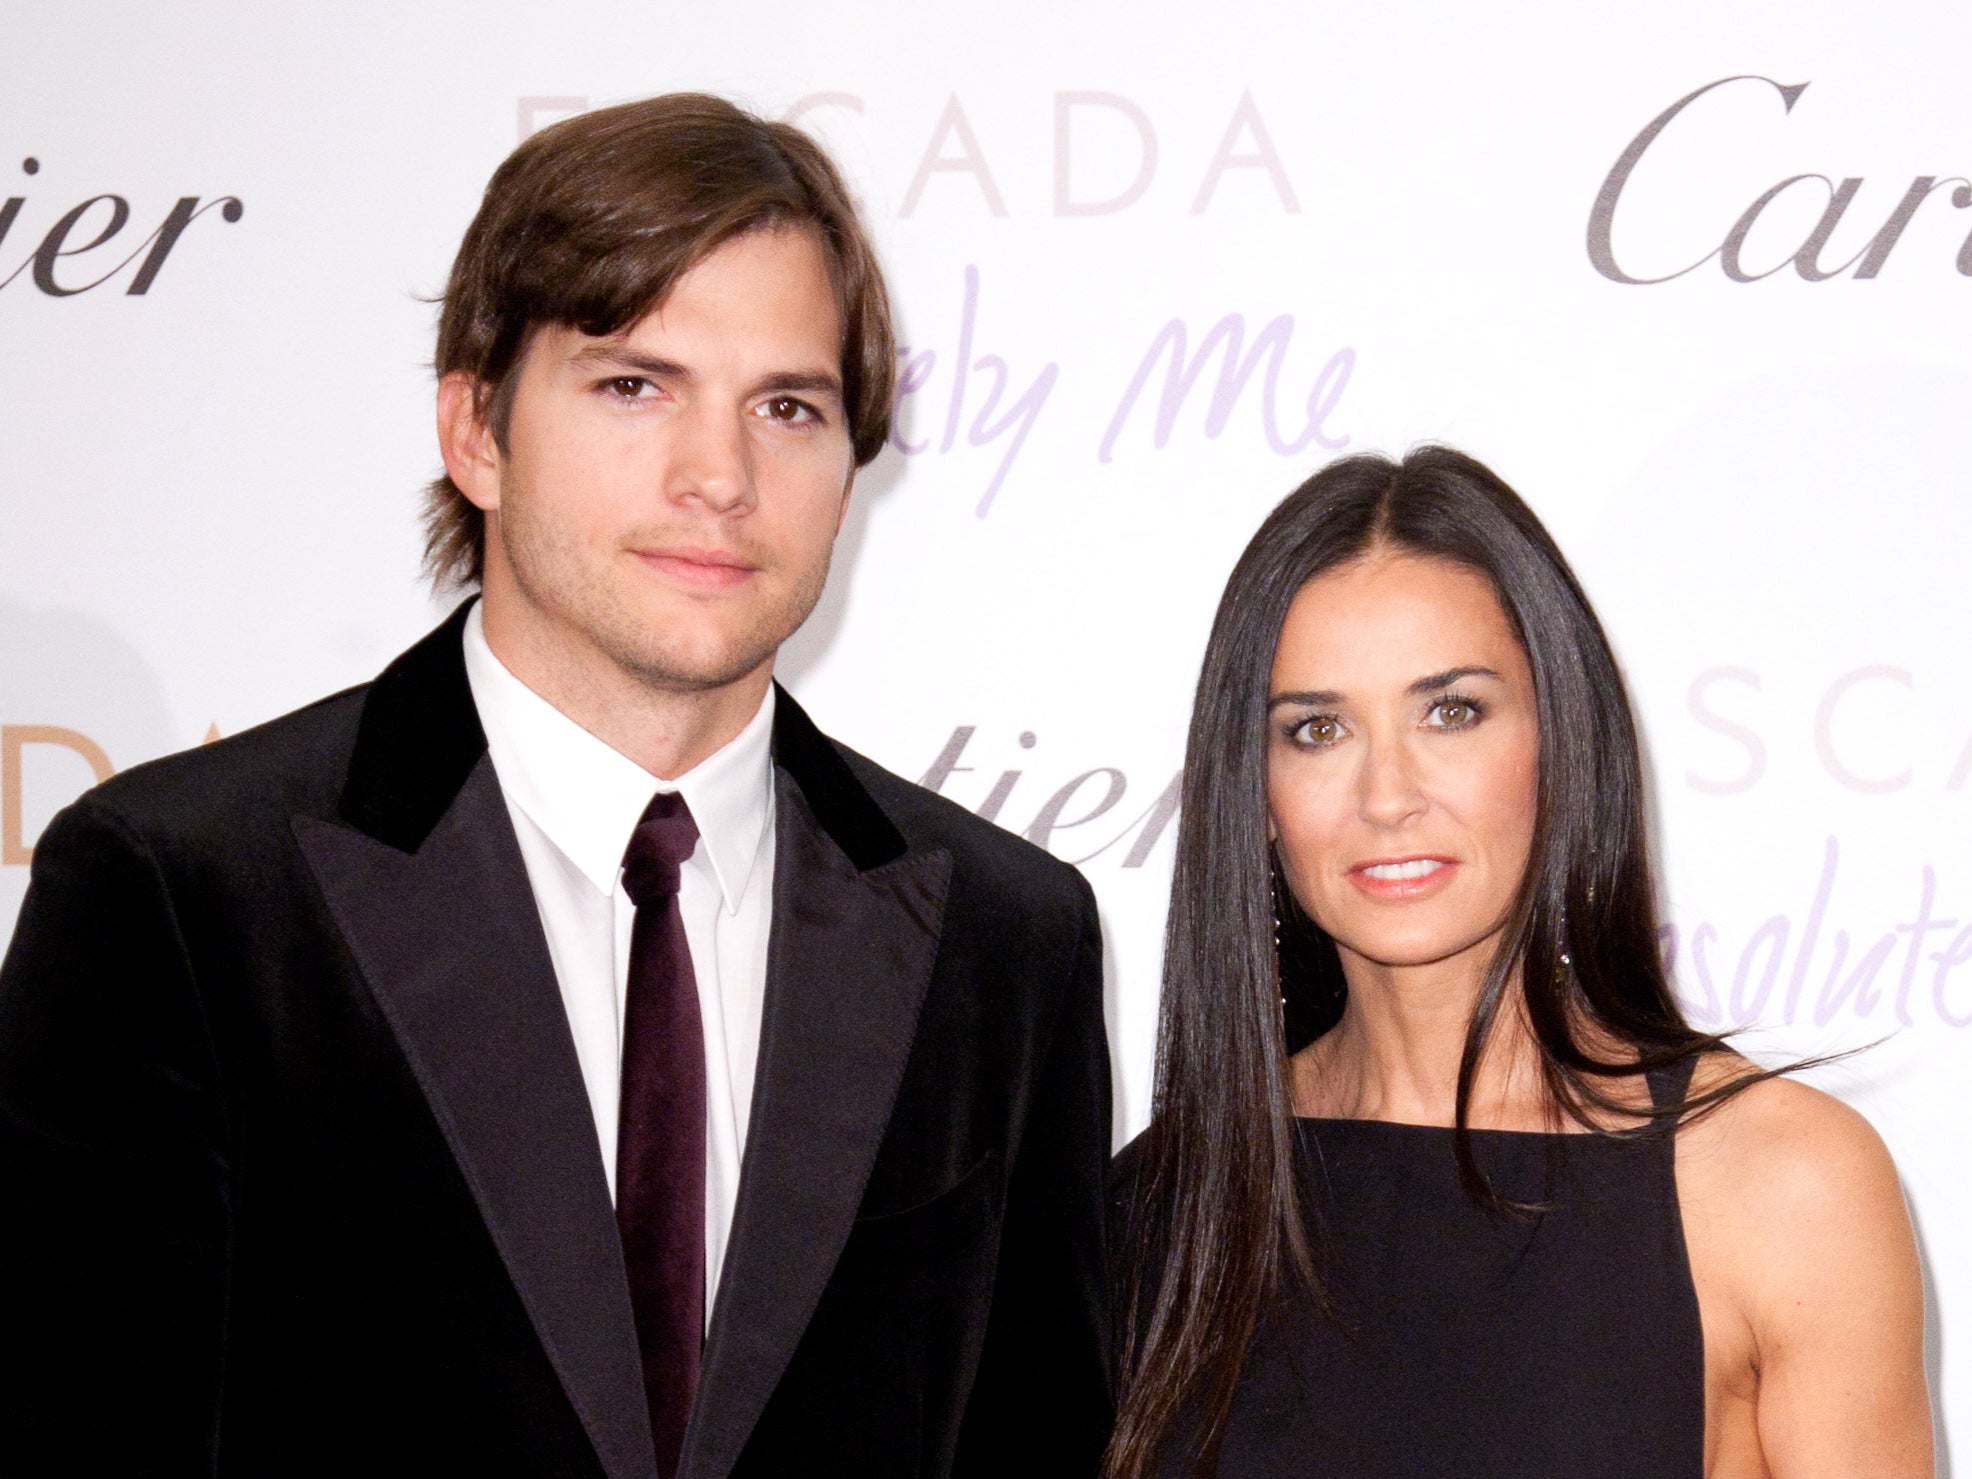 Ashton Kutcher was angry when Demi Moore released a memoir in 2019